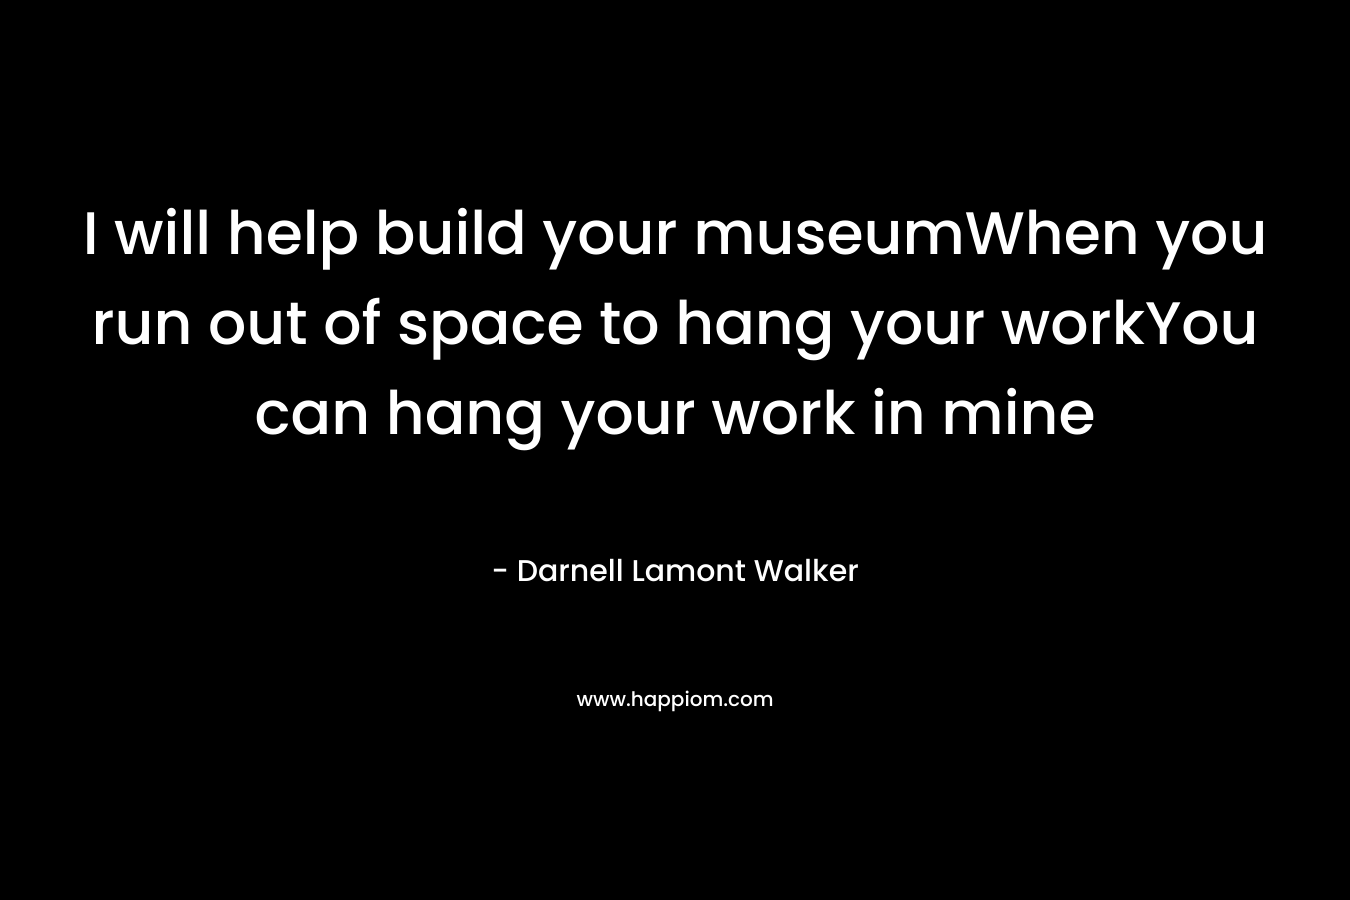 I will help build your museumWhen you run out of space to hang your workYou can hang your work in mine – Darnell Lamont Walker